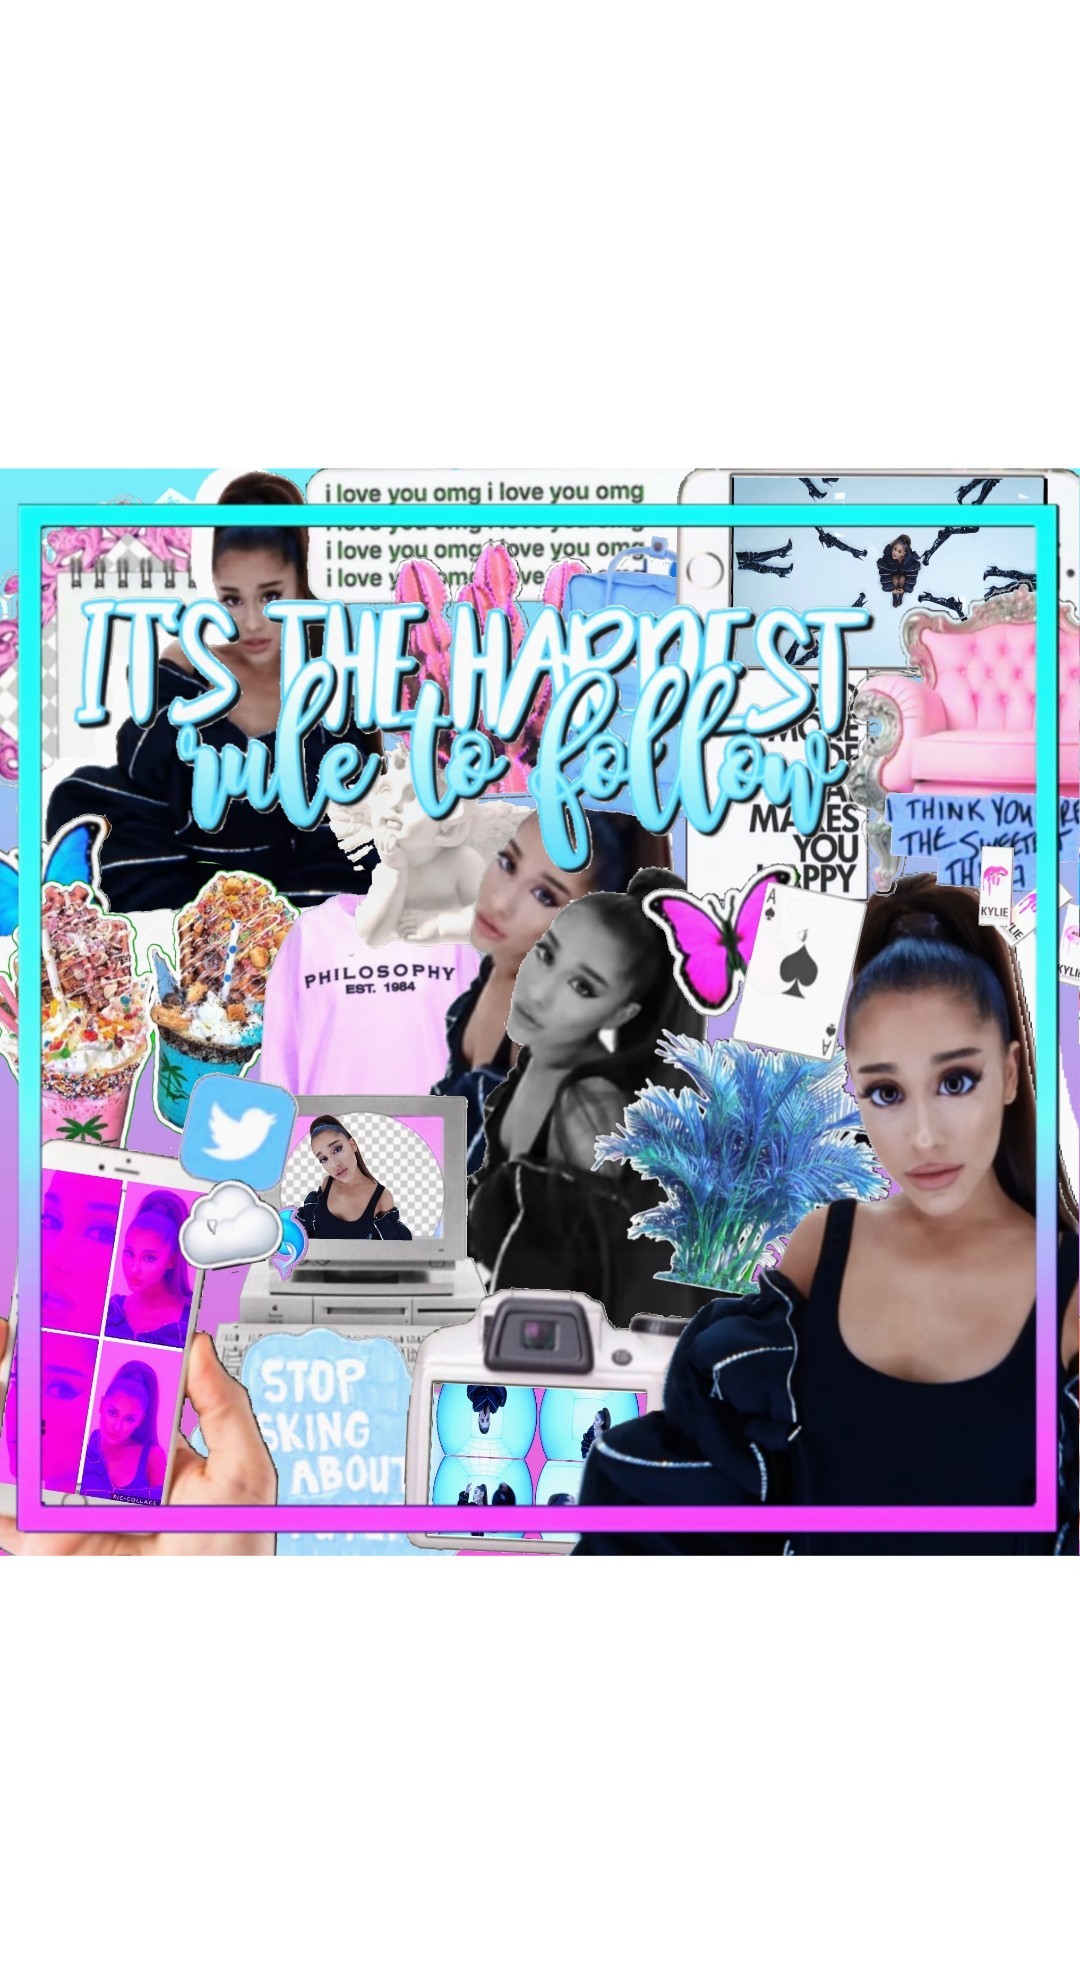 Tap
ari again
sorry I haven't been on
I really hate this edit it look horrible 
My theme will change soon 